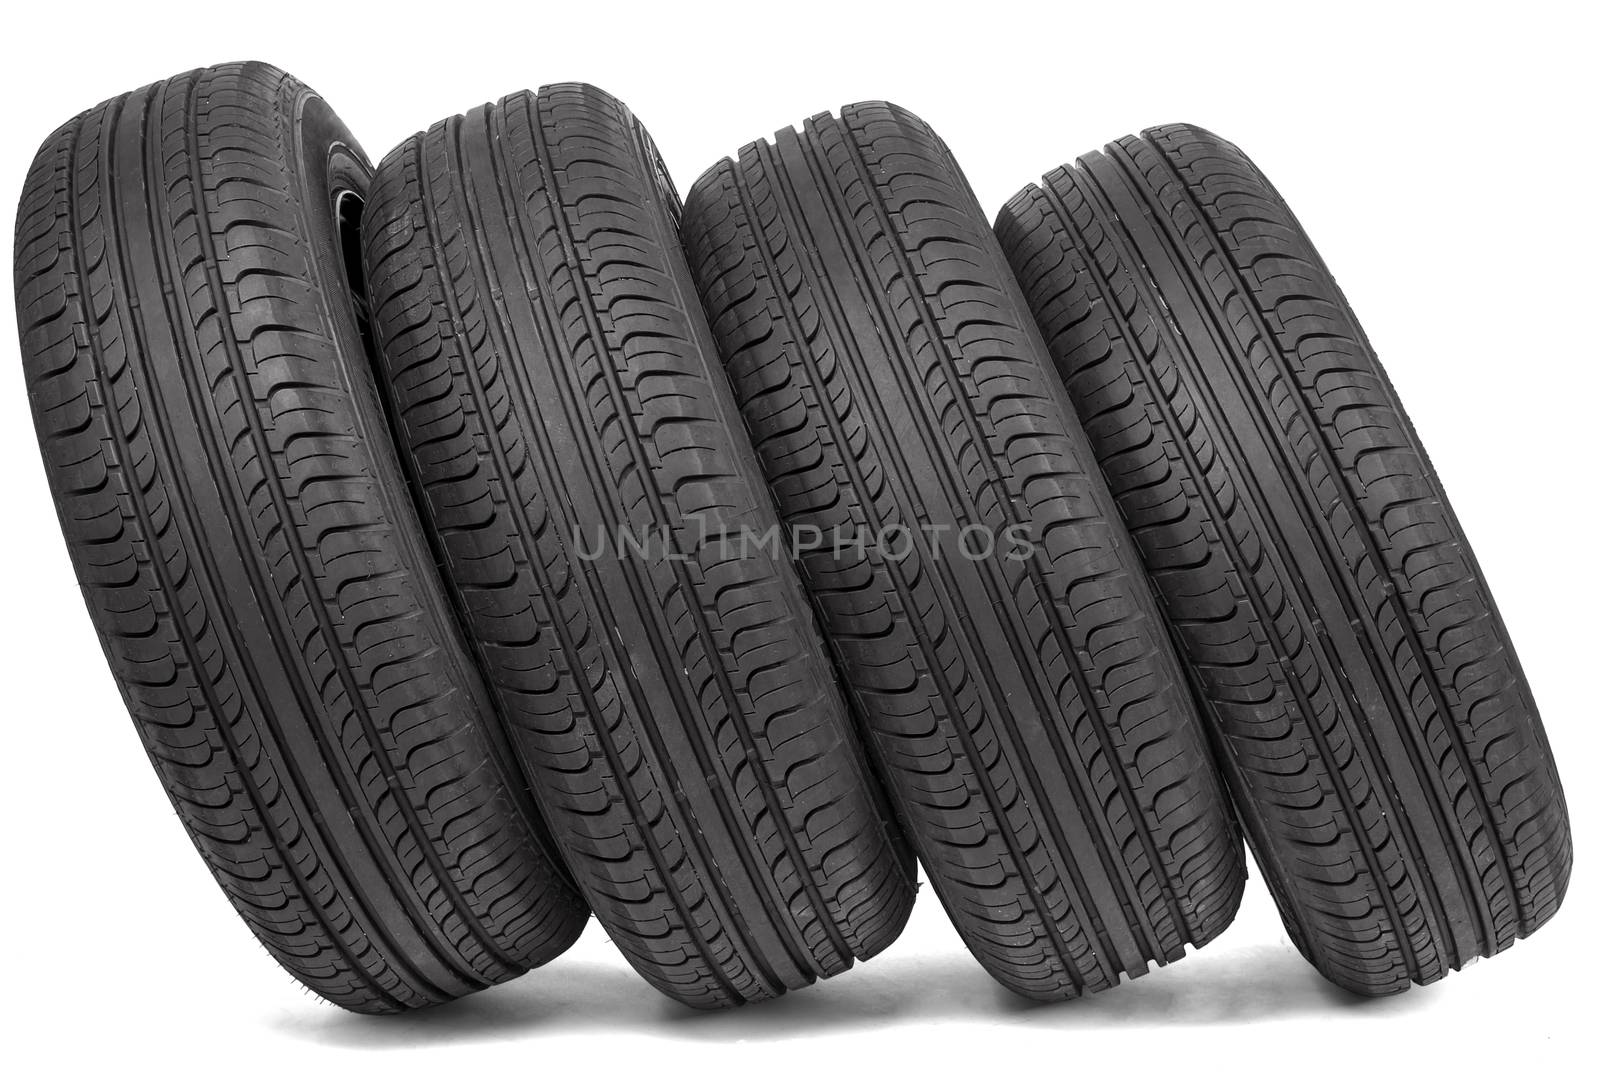 Four black tires. Isolated on white background